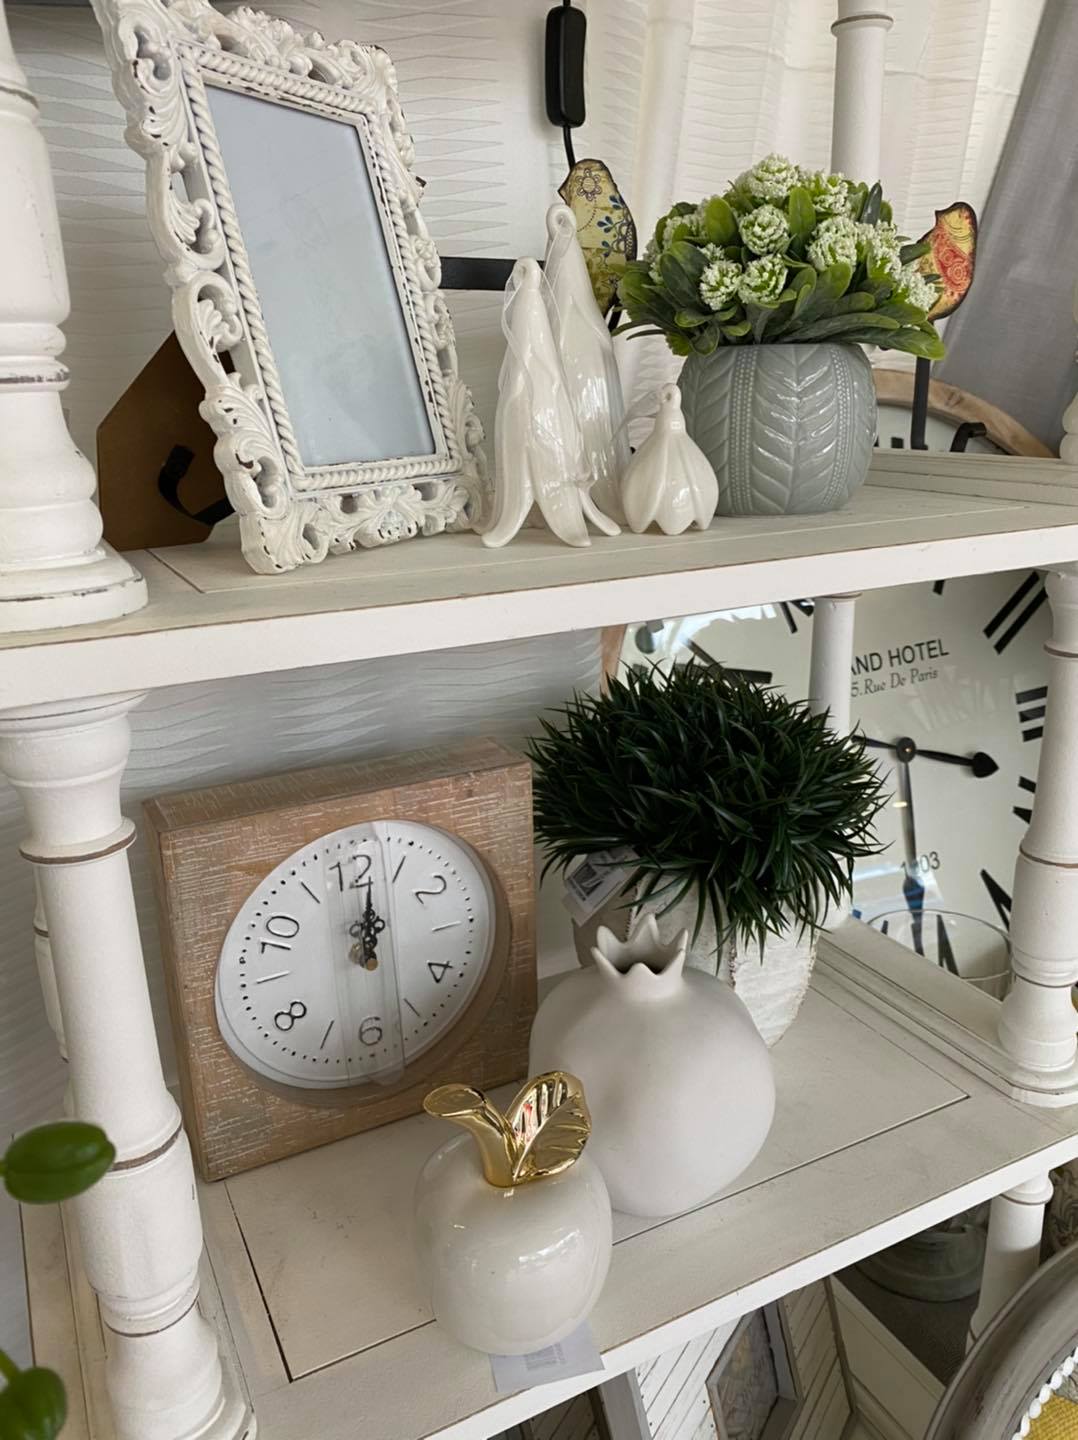 Wooden clock and small vases — Homeware provider in Tamworth, NSW